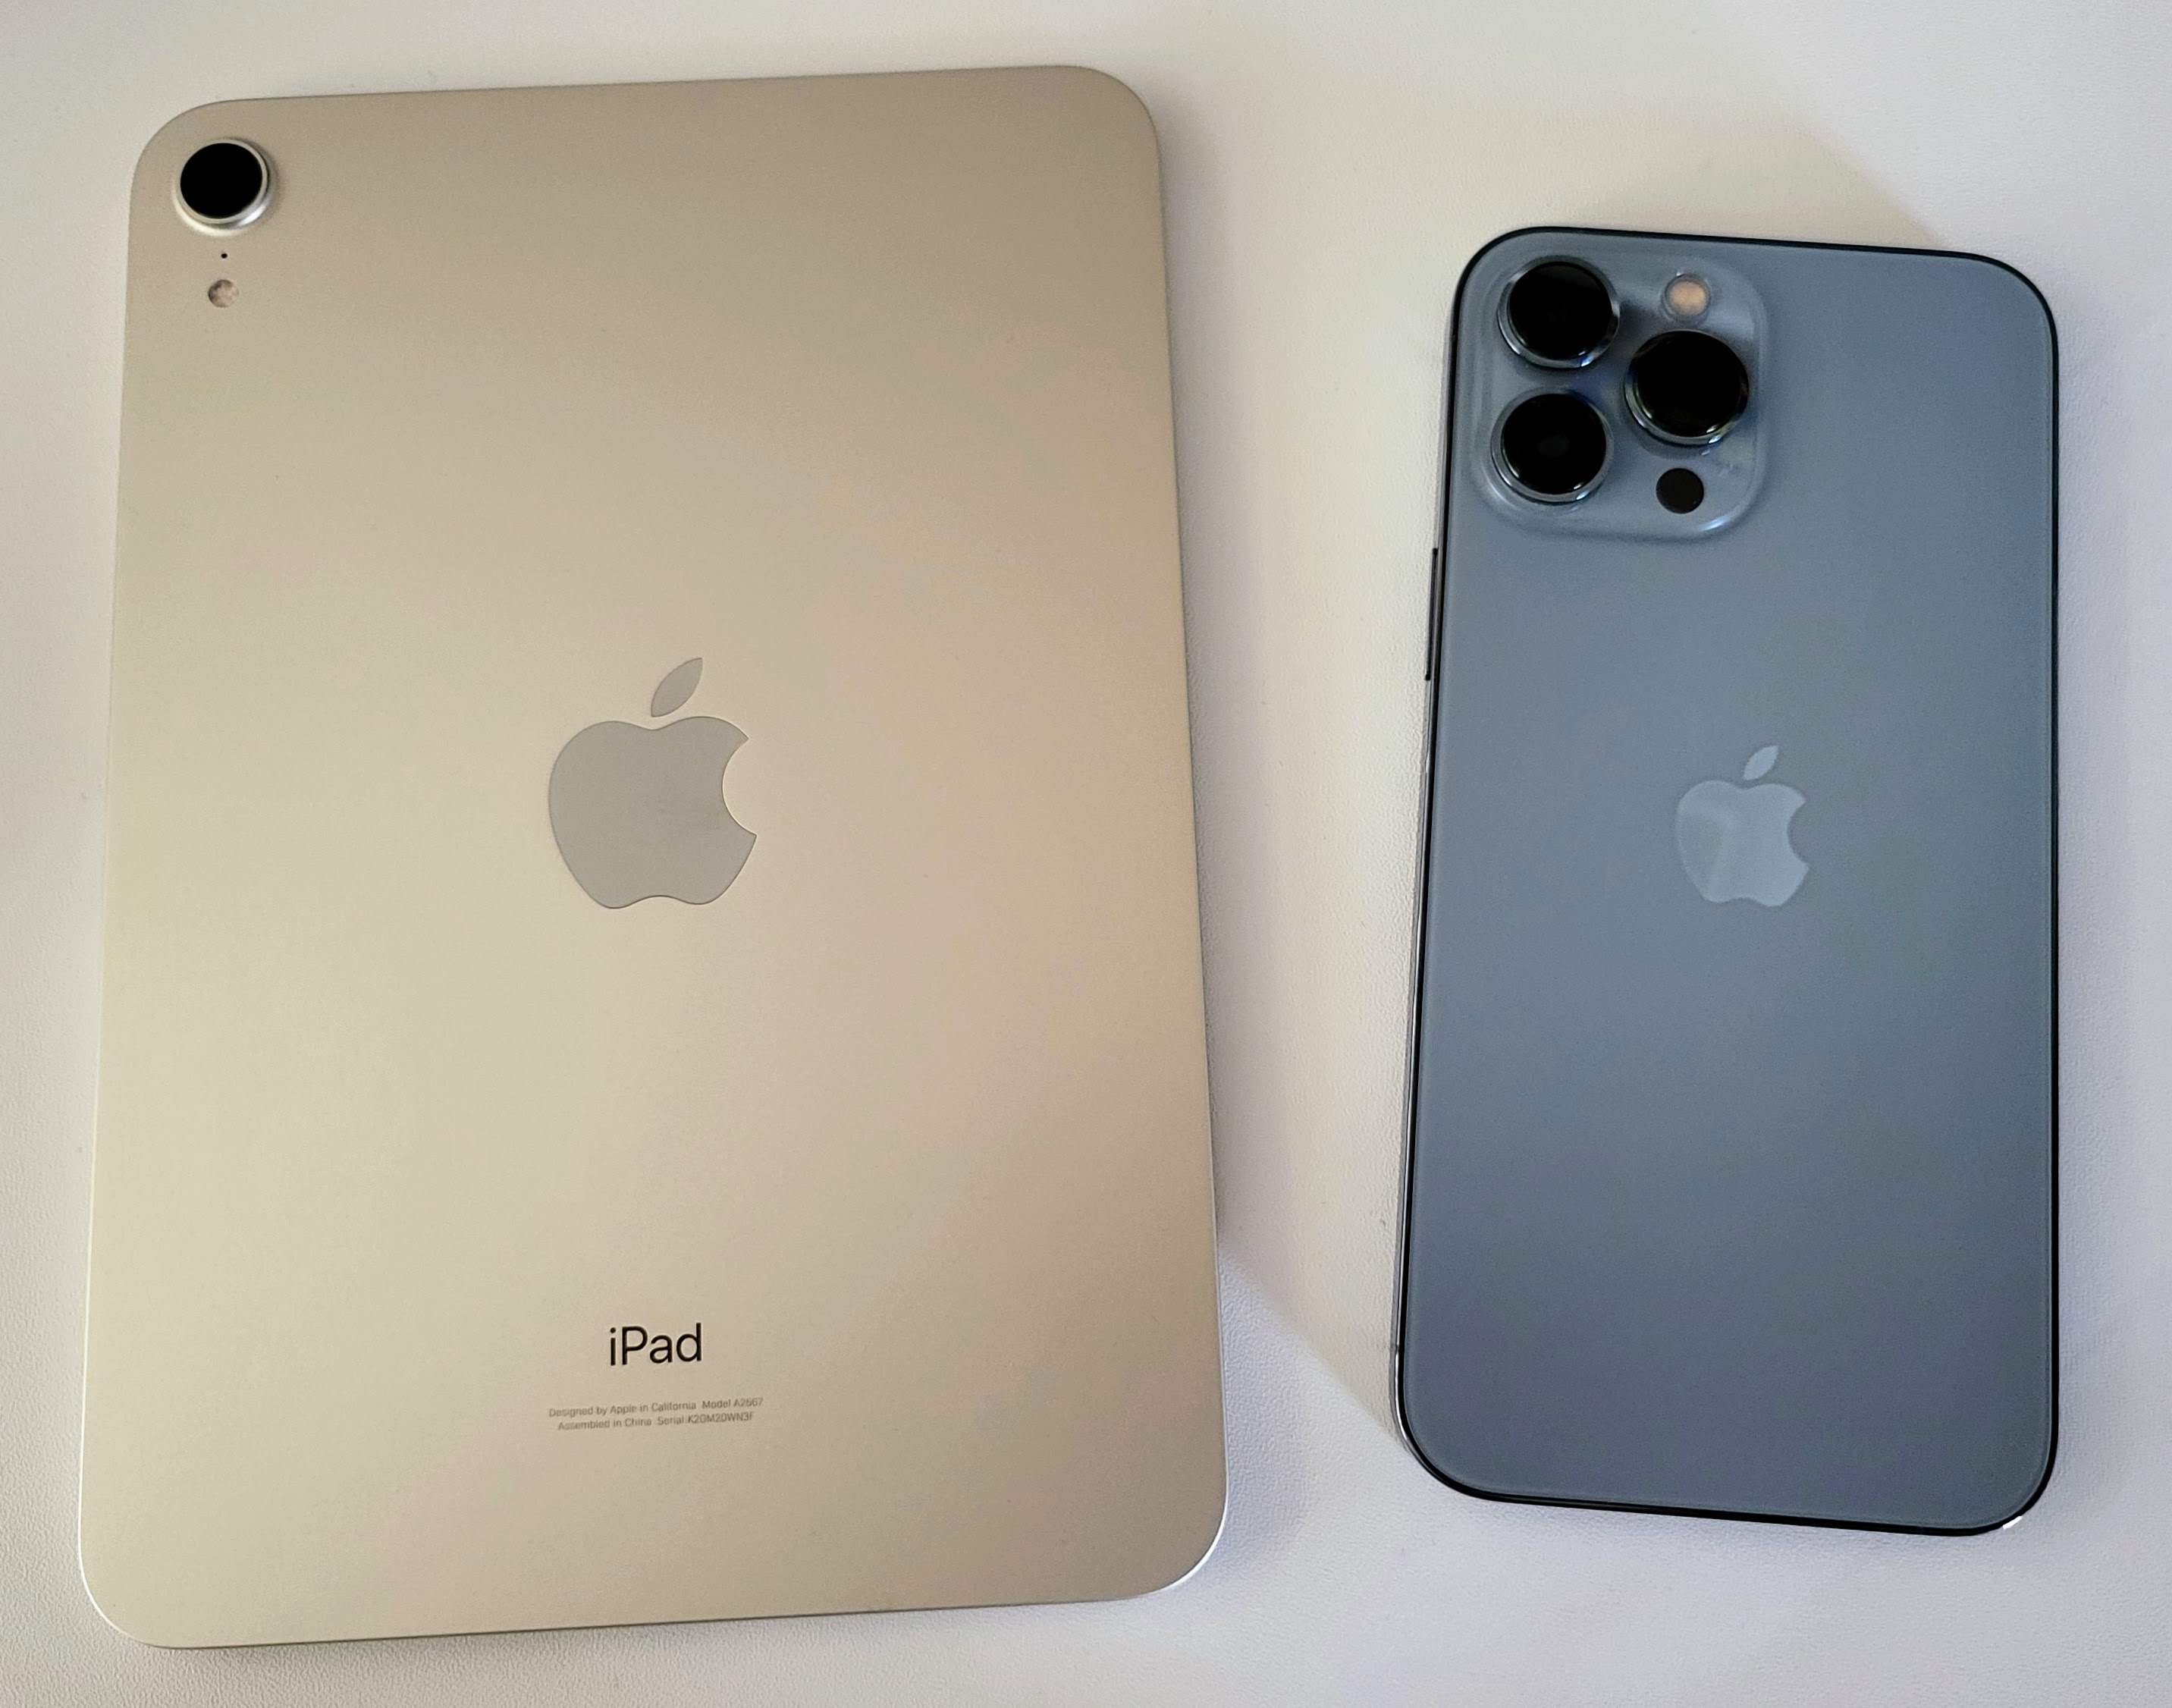 CPU and GPU of the A15 Bionic in the iPad mini confirmed than the iPhone 13 Pro in our early testing - NotebookCheck.net News